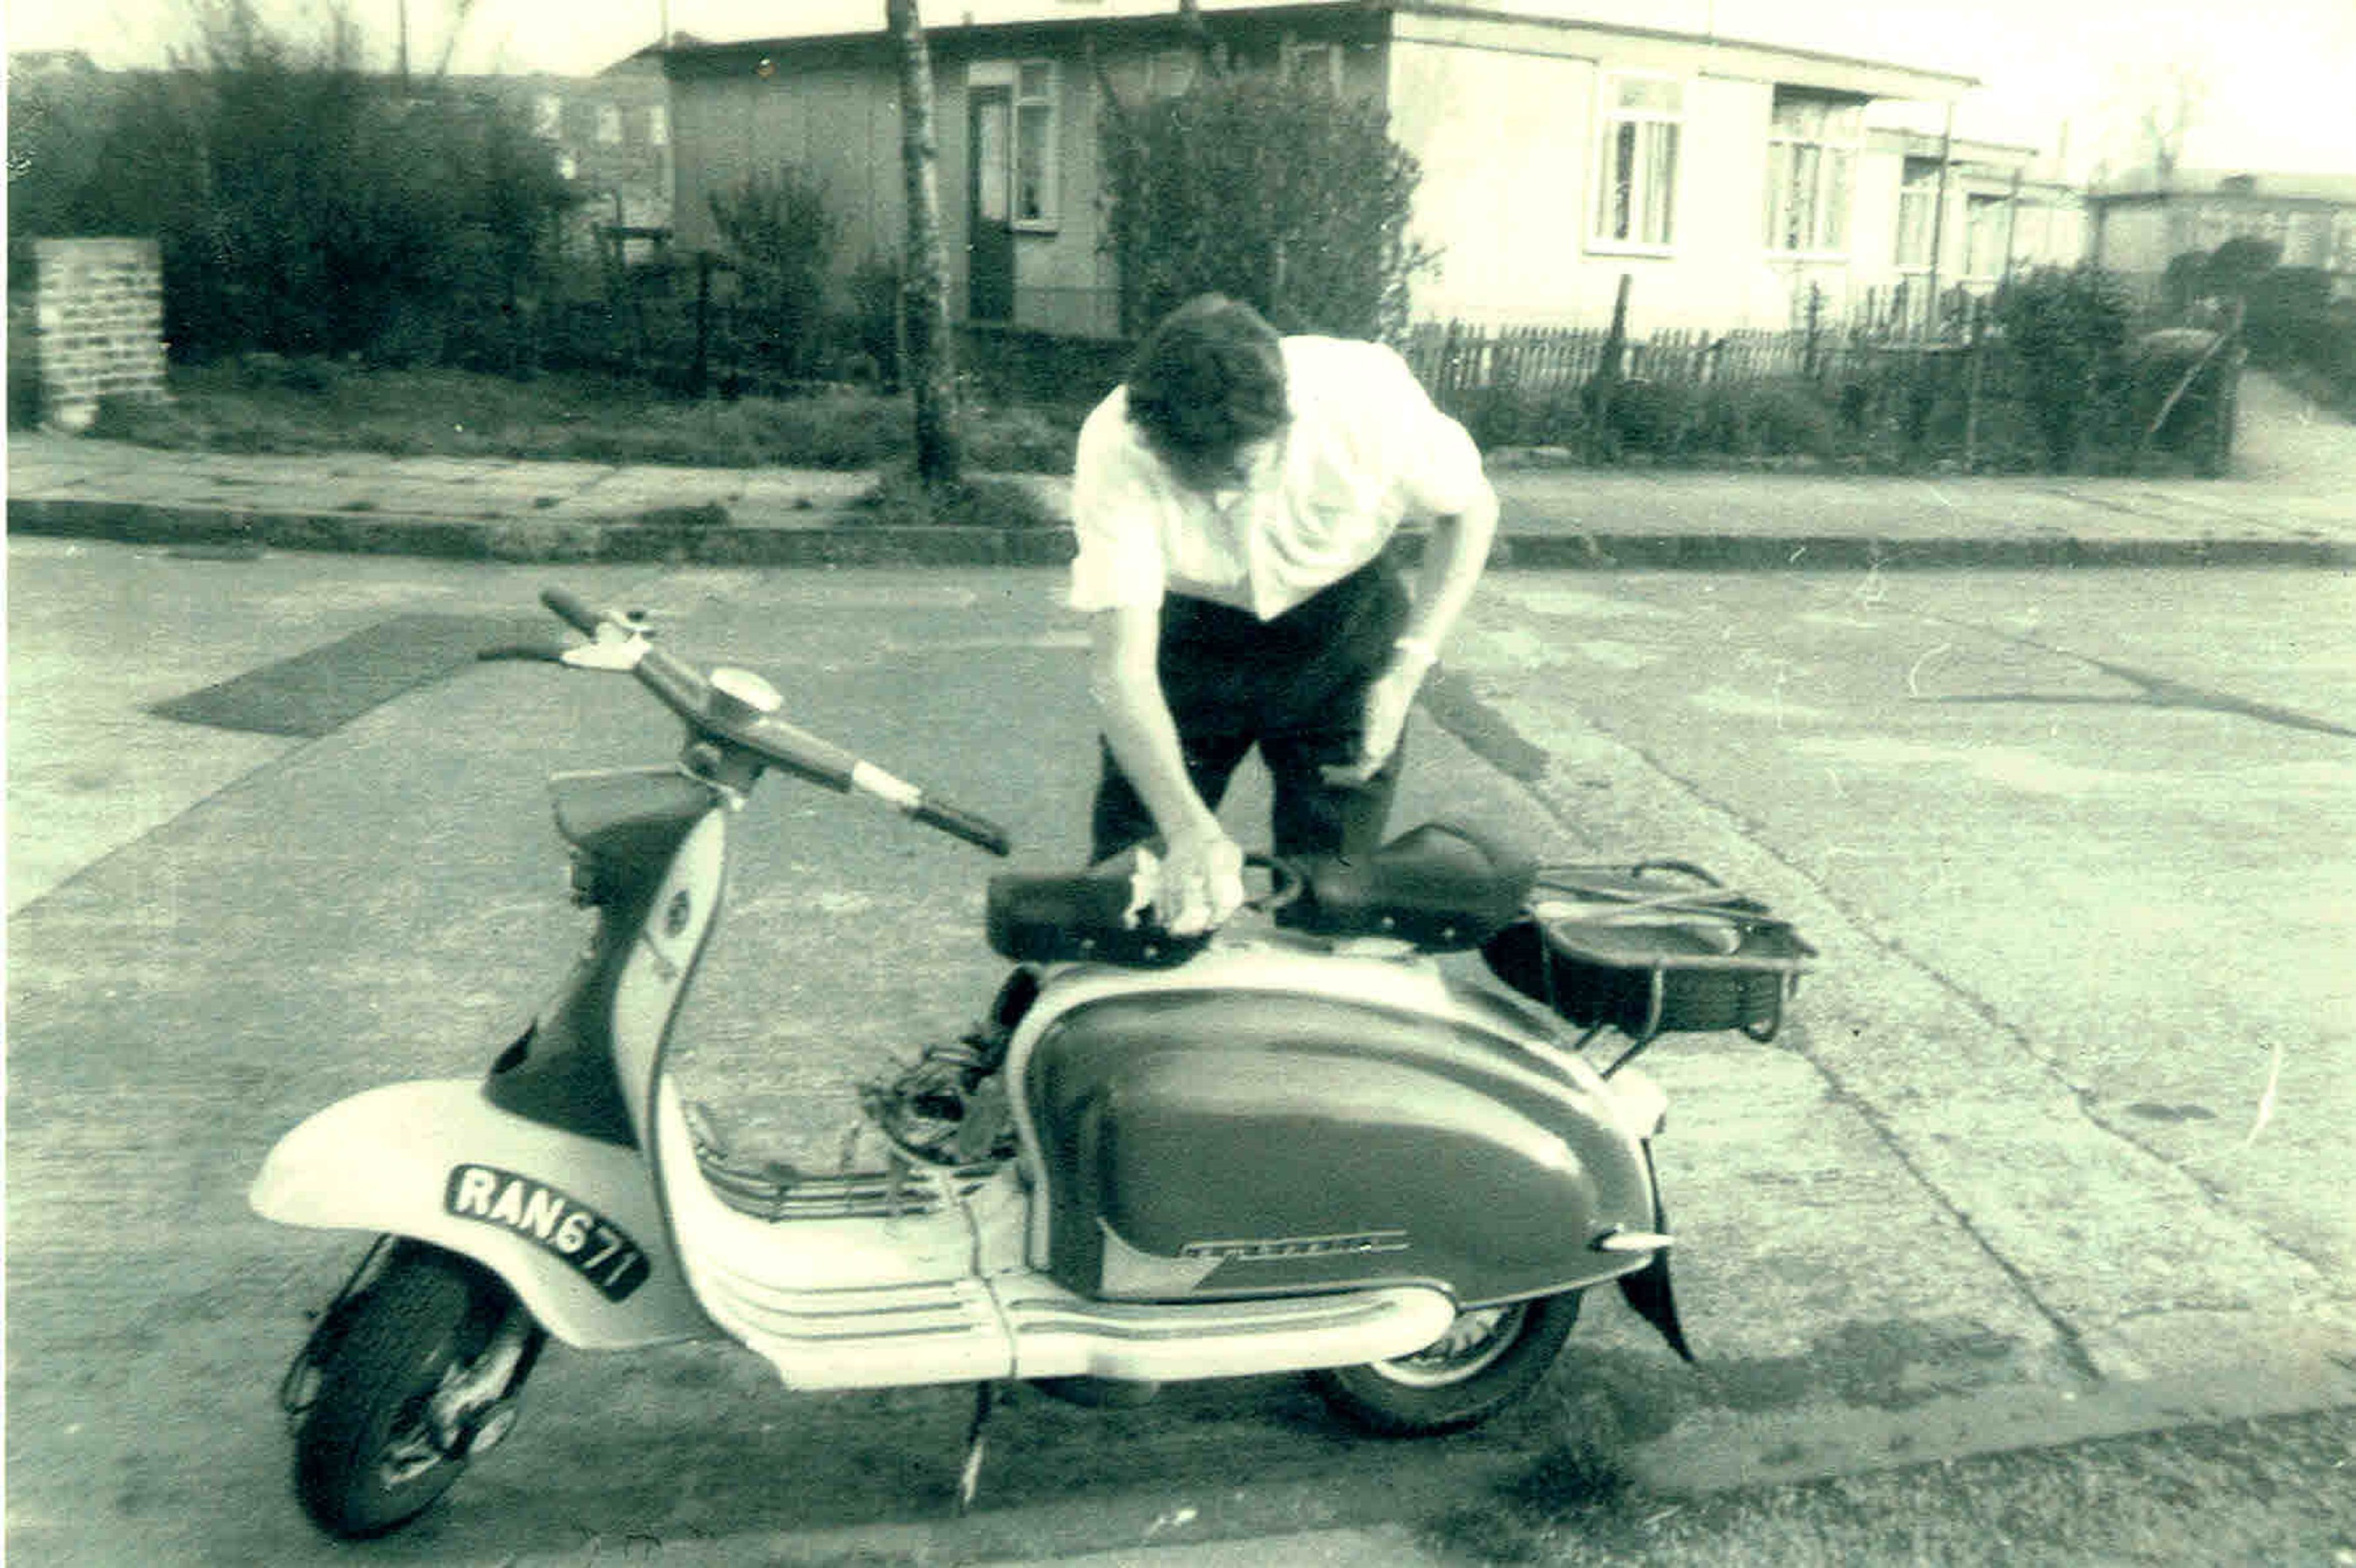 Bob Strudwick working on his scooter, taken from Mr and Mrs Marshalls prefab at No 6, Strattondale Street, Isle of Dogs, London 50s or 60s